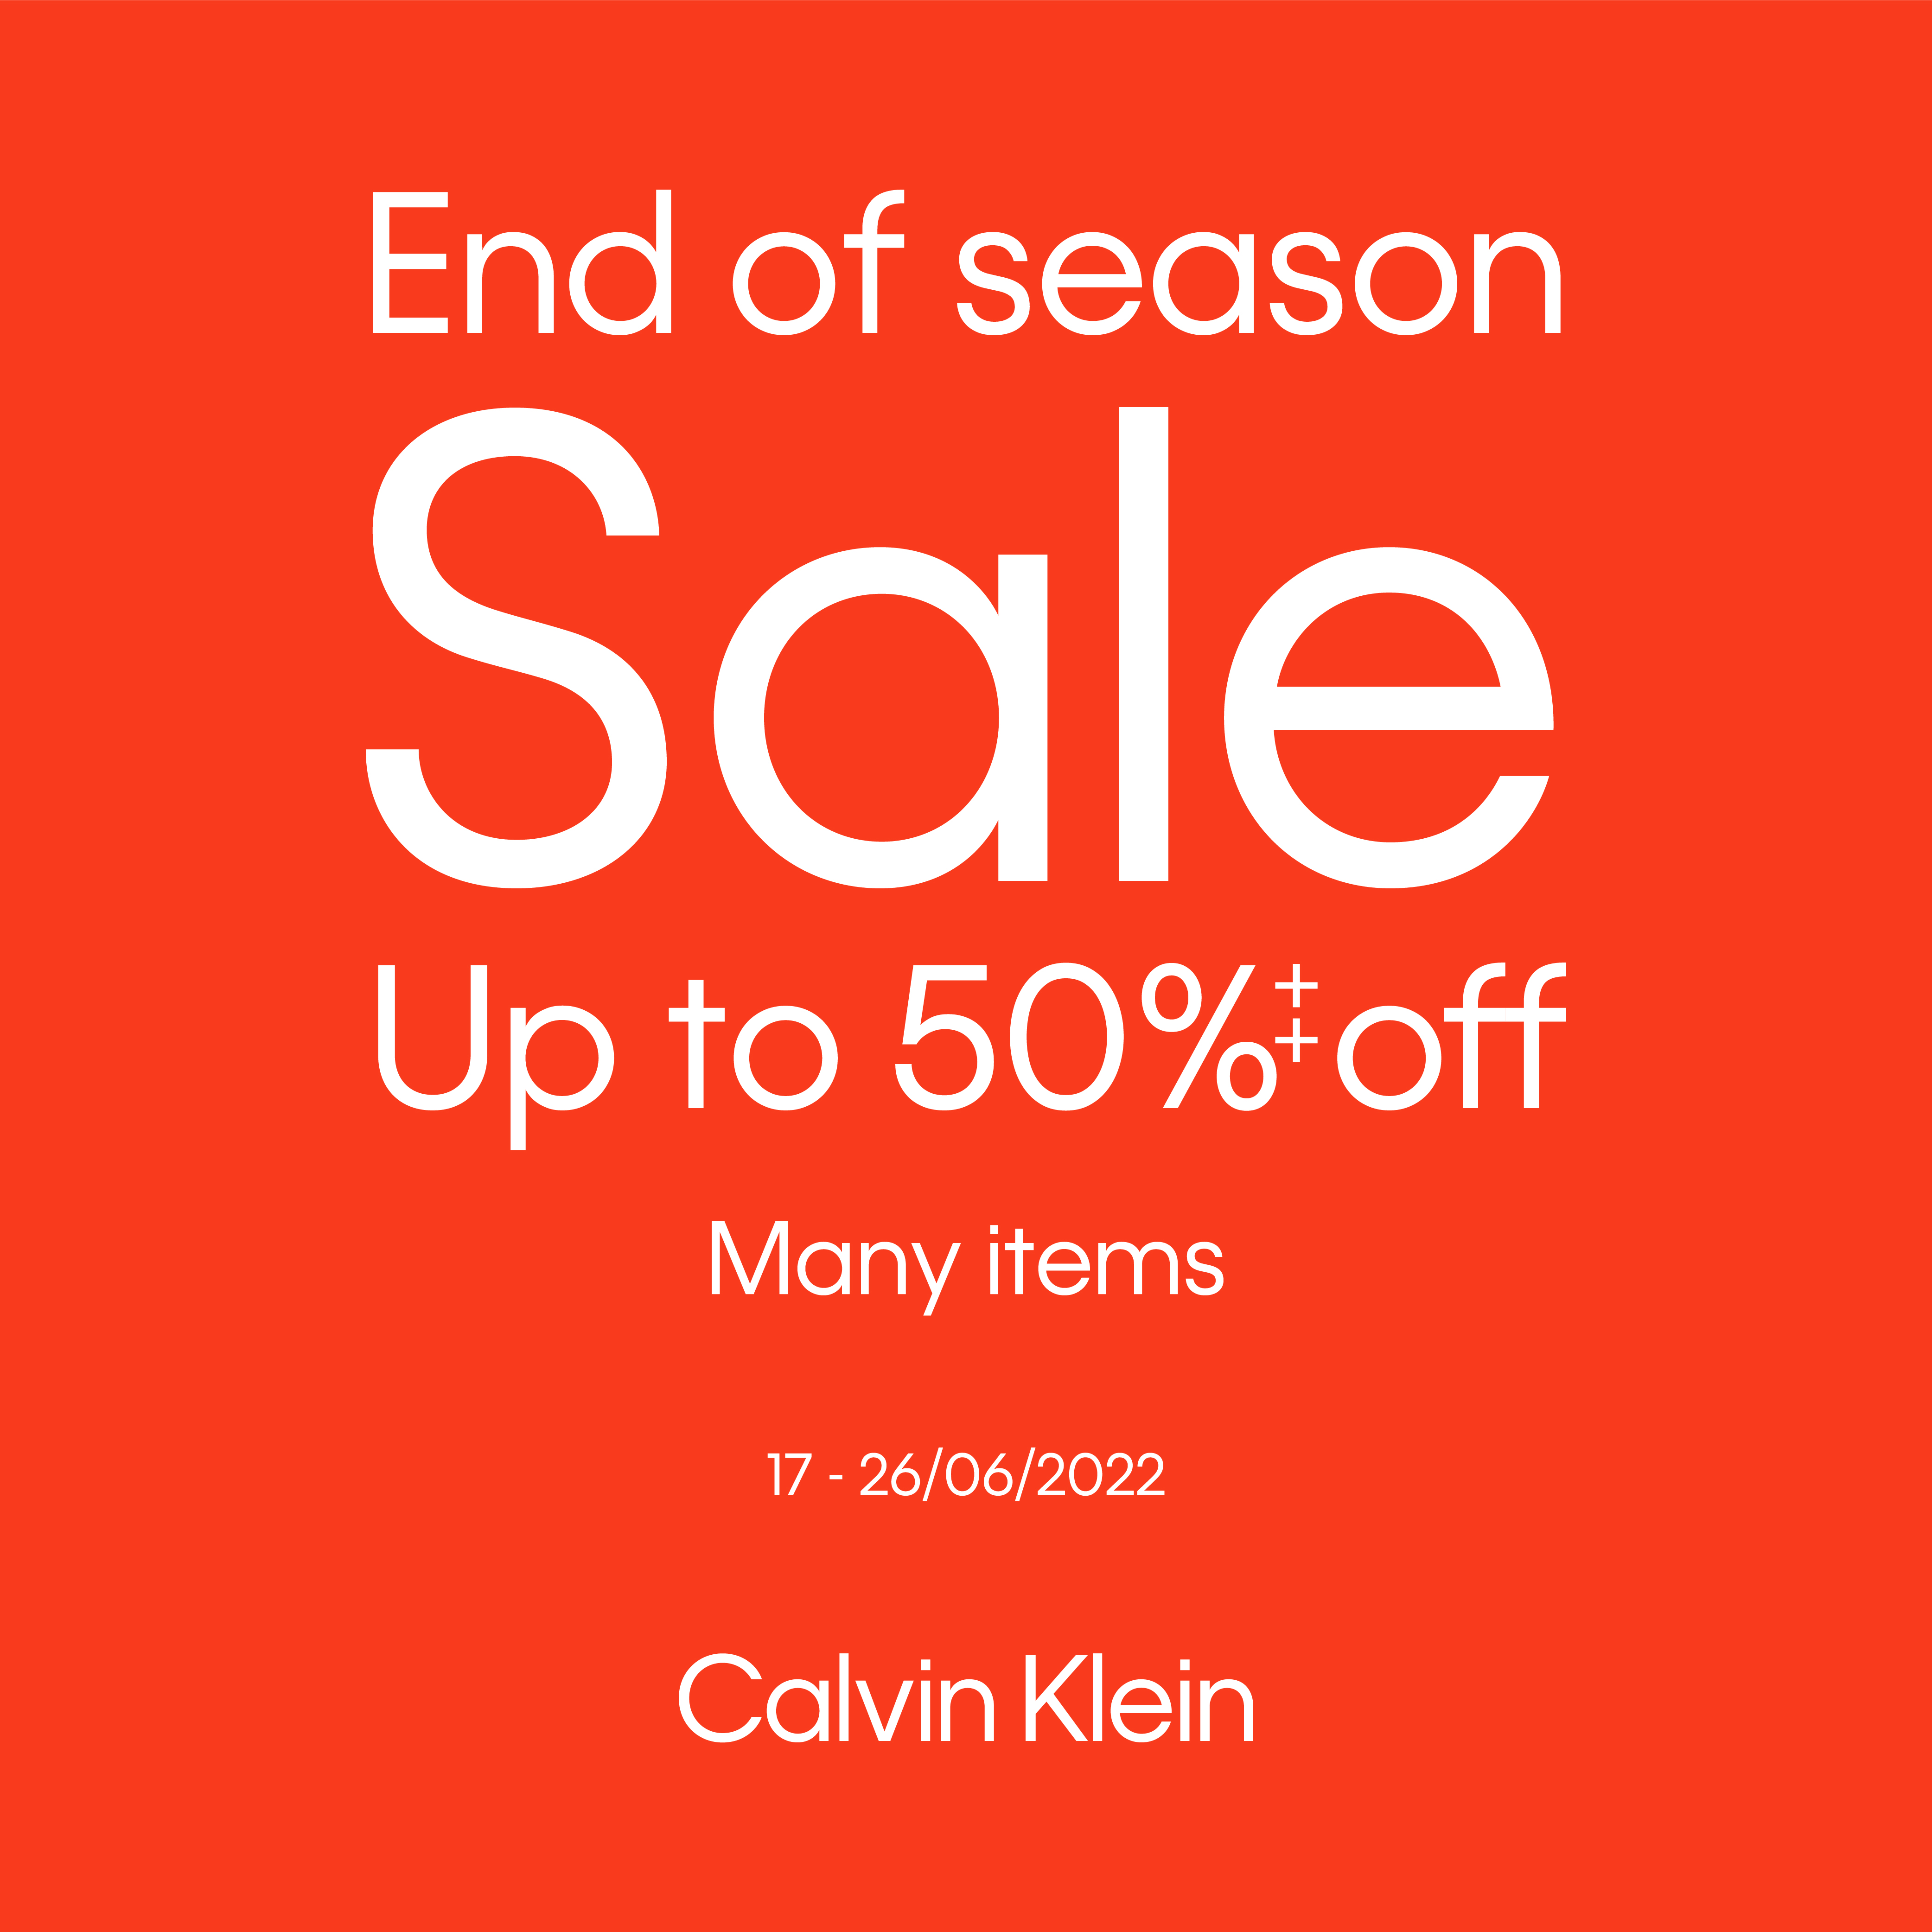 CALVIN KLEIN - END OF SEASON SALE - UP TO 50%++ MANY ITEMS! | Vincom